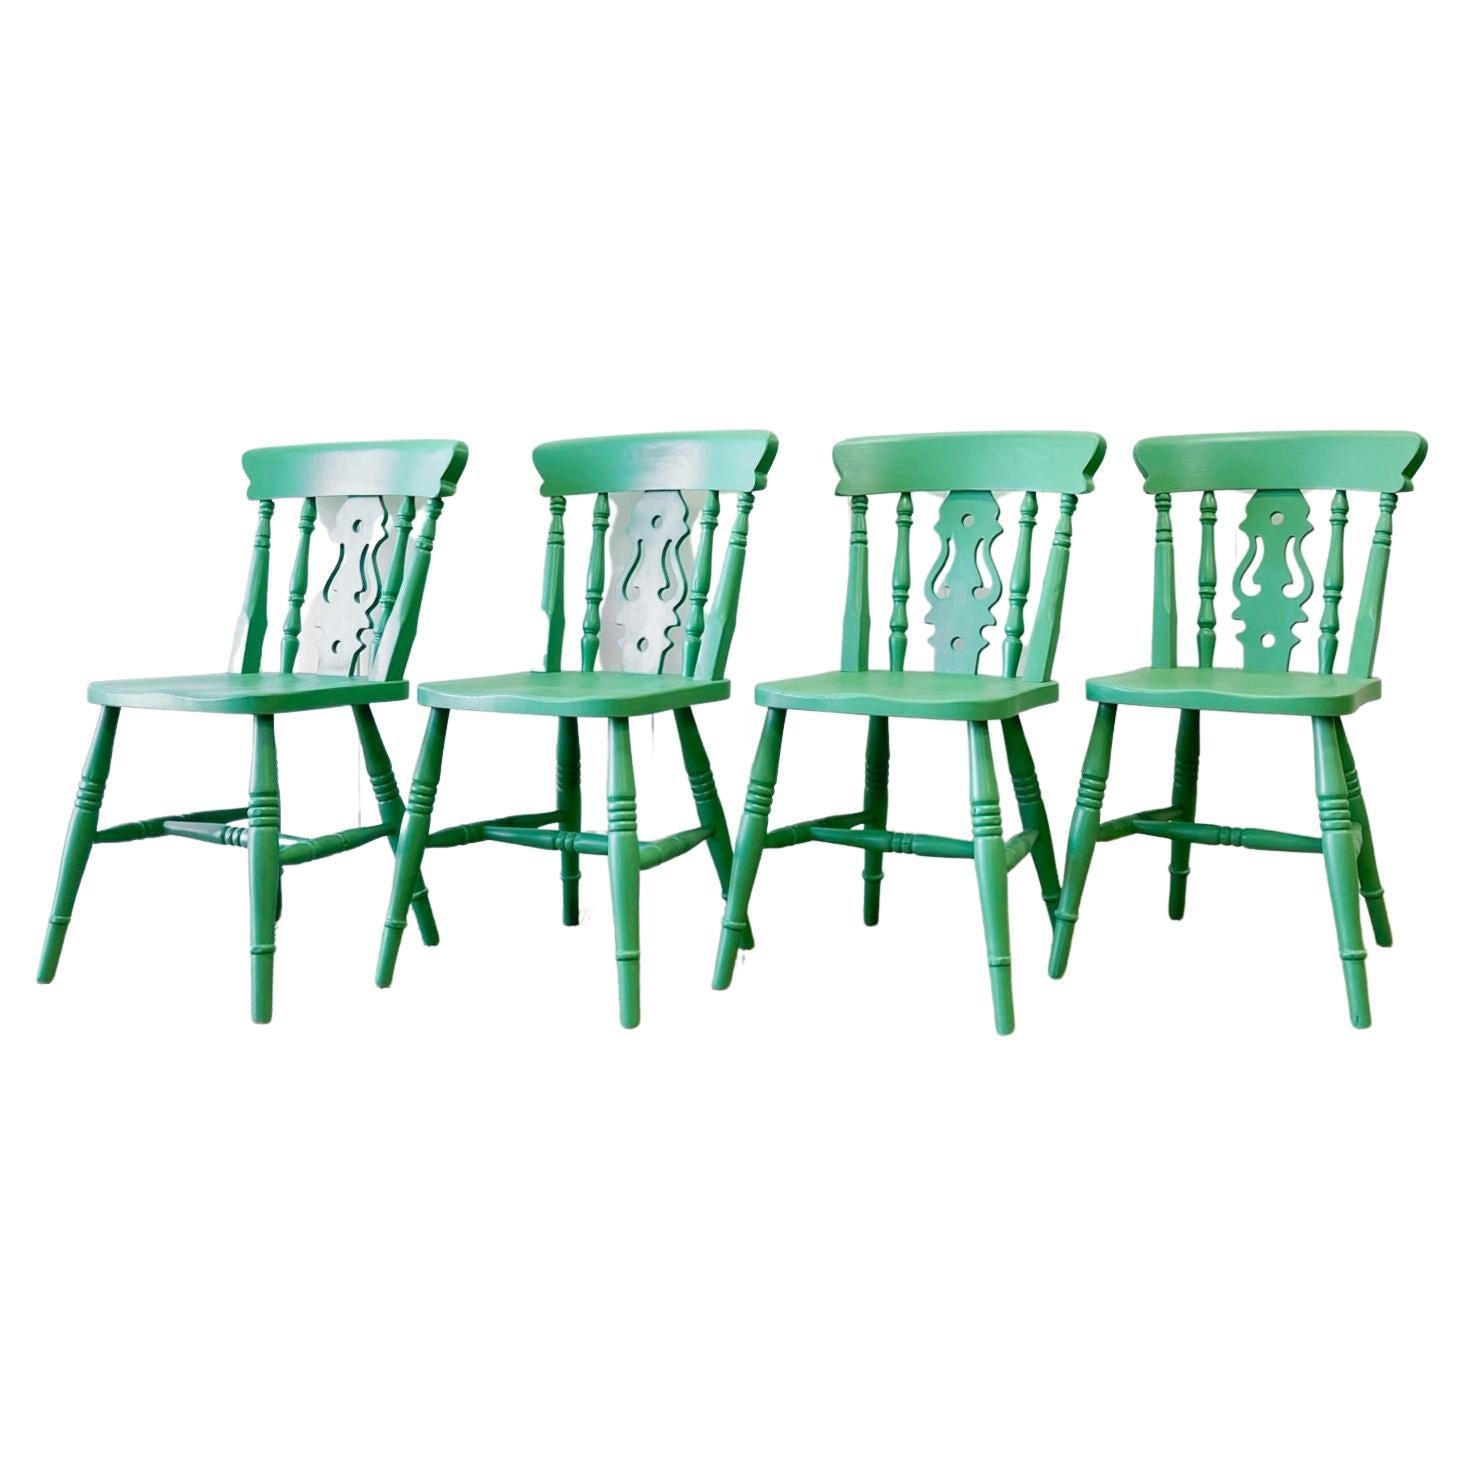 A Set of 4 Fiddleback Chairs For Sale